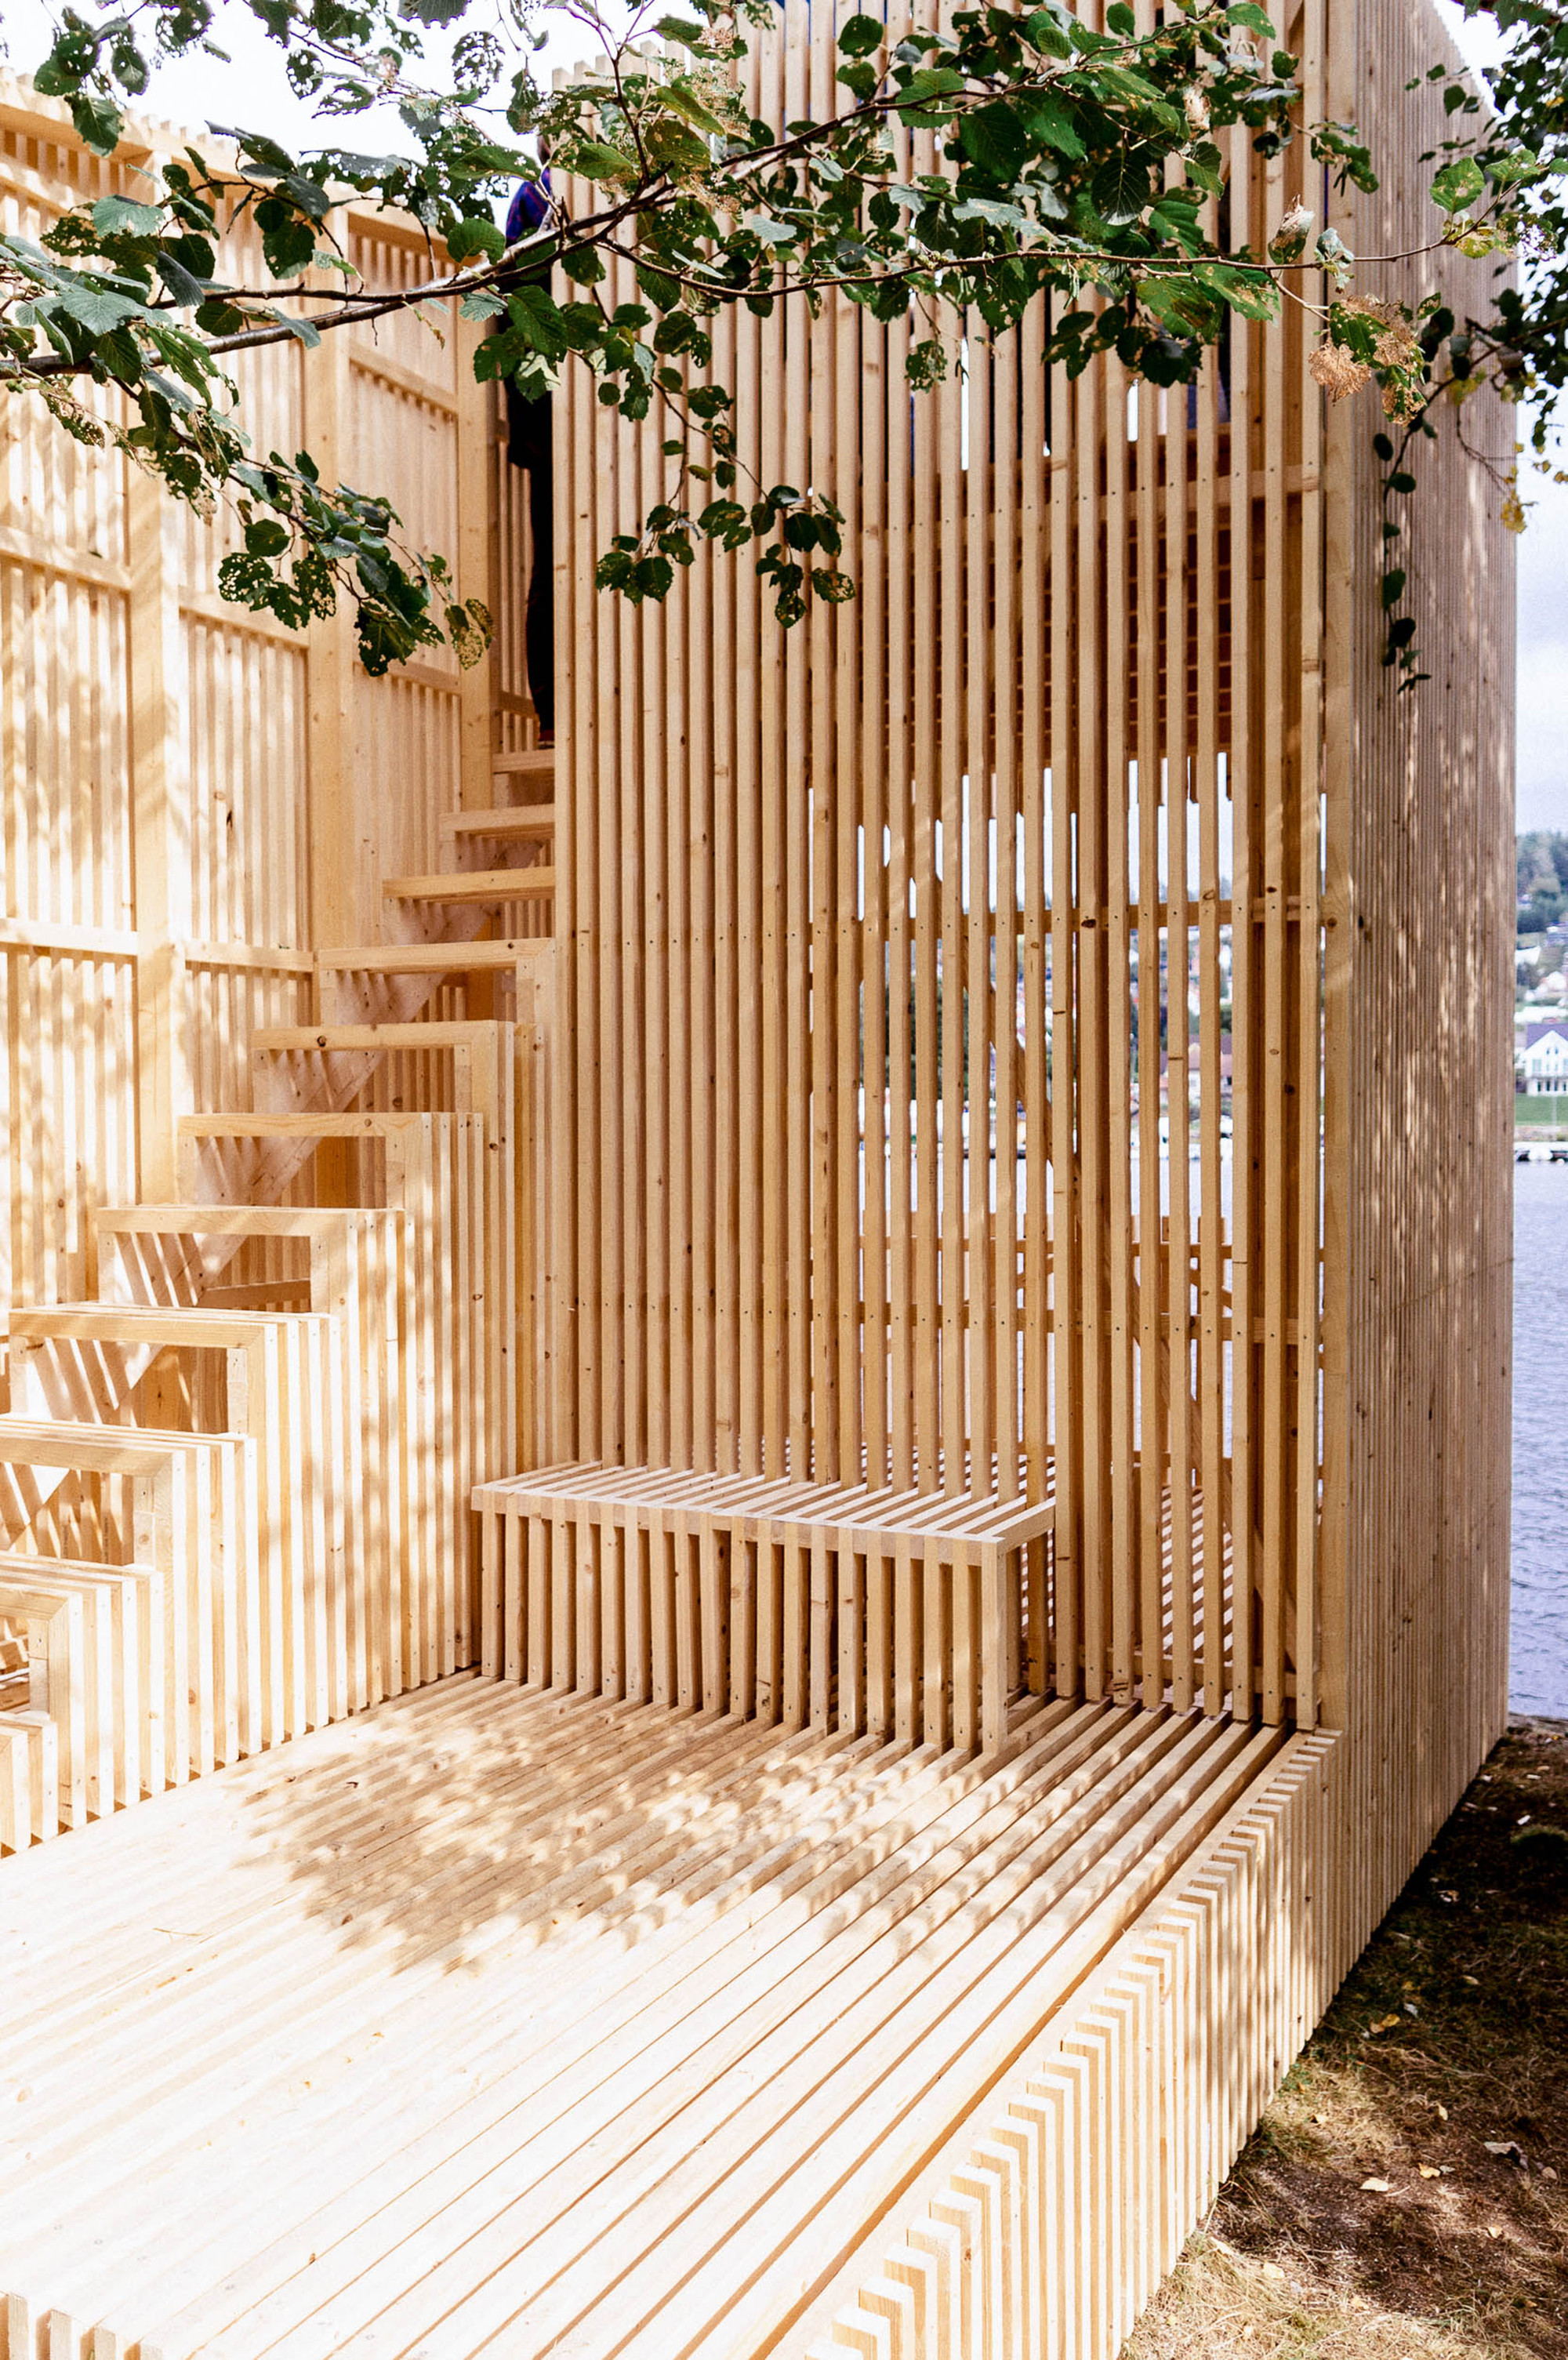 Architectural Trend: Slatted Wood